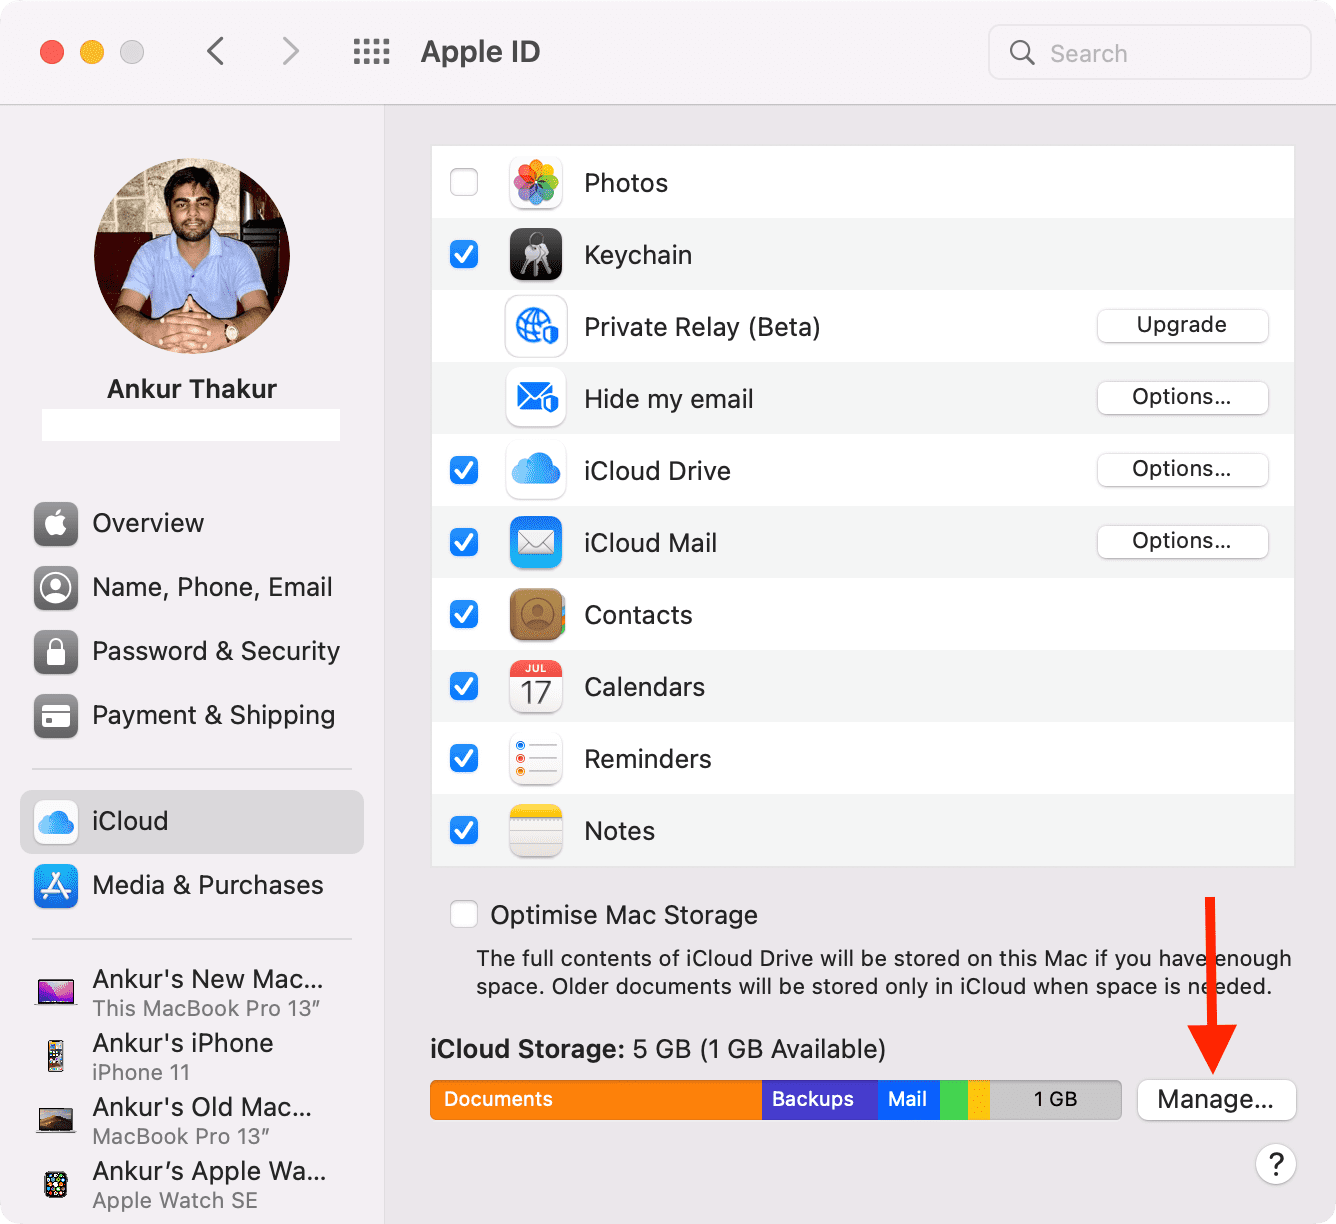 Manage iCloud Storage from your Mac